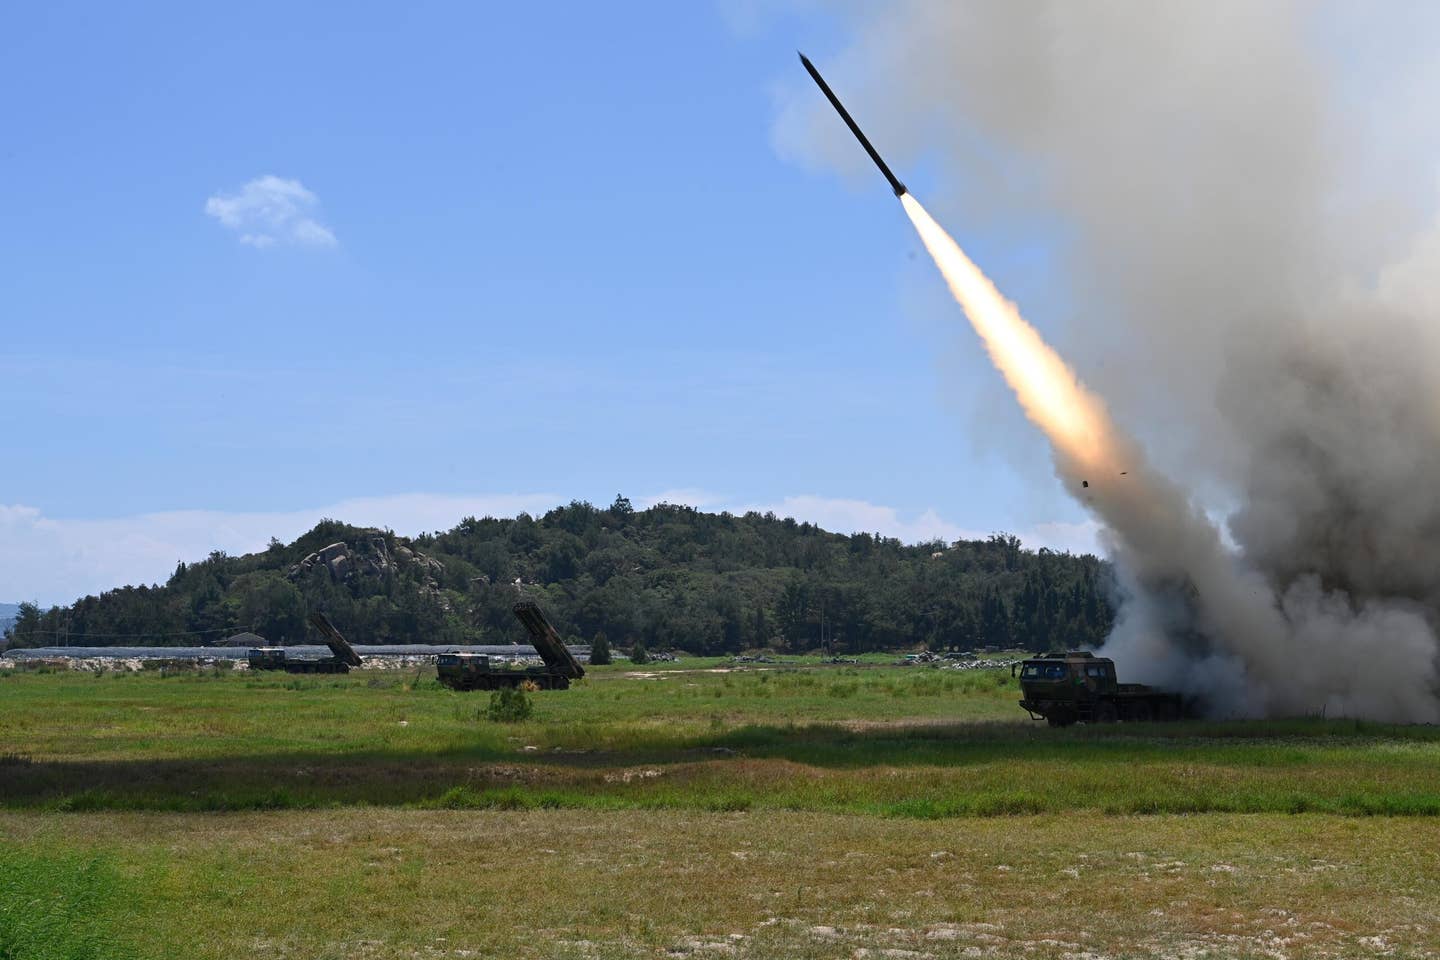 Multiple rocket launchers, apparently 370mm caliber <a href="https://weaponsystems.net/system/481-PHL16">PHL-16s</a>, from the Eastern Theater Command of the Chinese PLA conduct long-range live-fire drills in the Taiwan Strait, August 4, 2022. <em>Photo by Lai Qiaoquan/Xinhua via Getty Images</em>